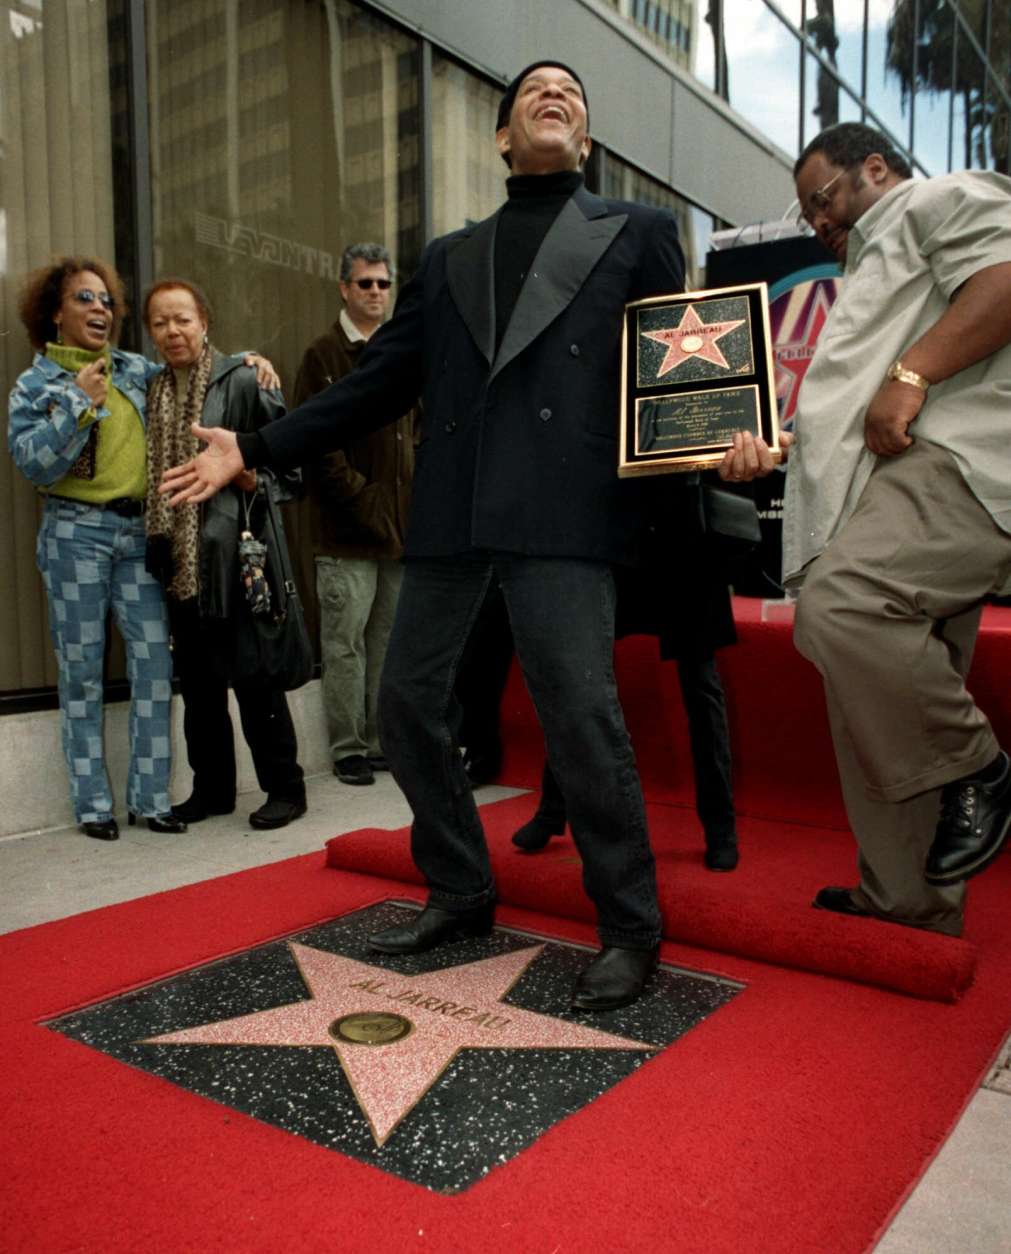 Grammy award winning singer Al Jarreau, center, celebrates with family and friends after he was honored the 2,174th star on the Hollywood Walk of Fame, Tuesday, March 6, 2001, in Los Angeles. (AP Photo/Patrick Liotta)